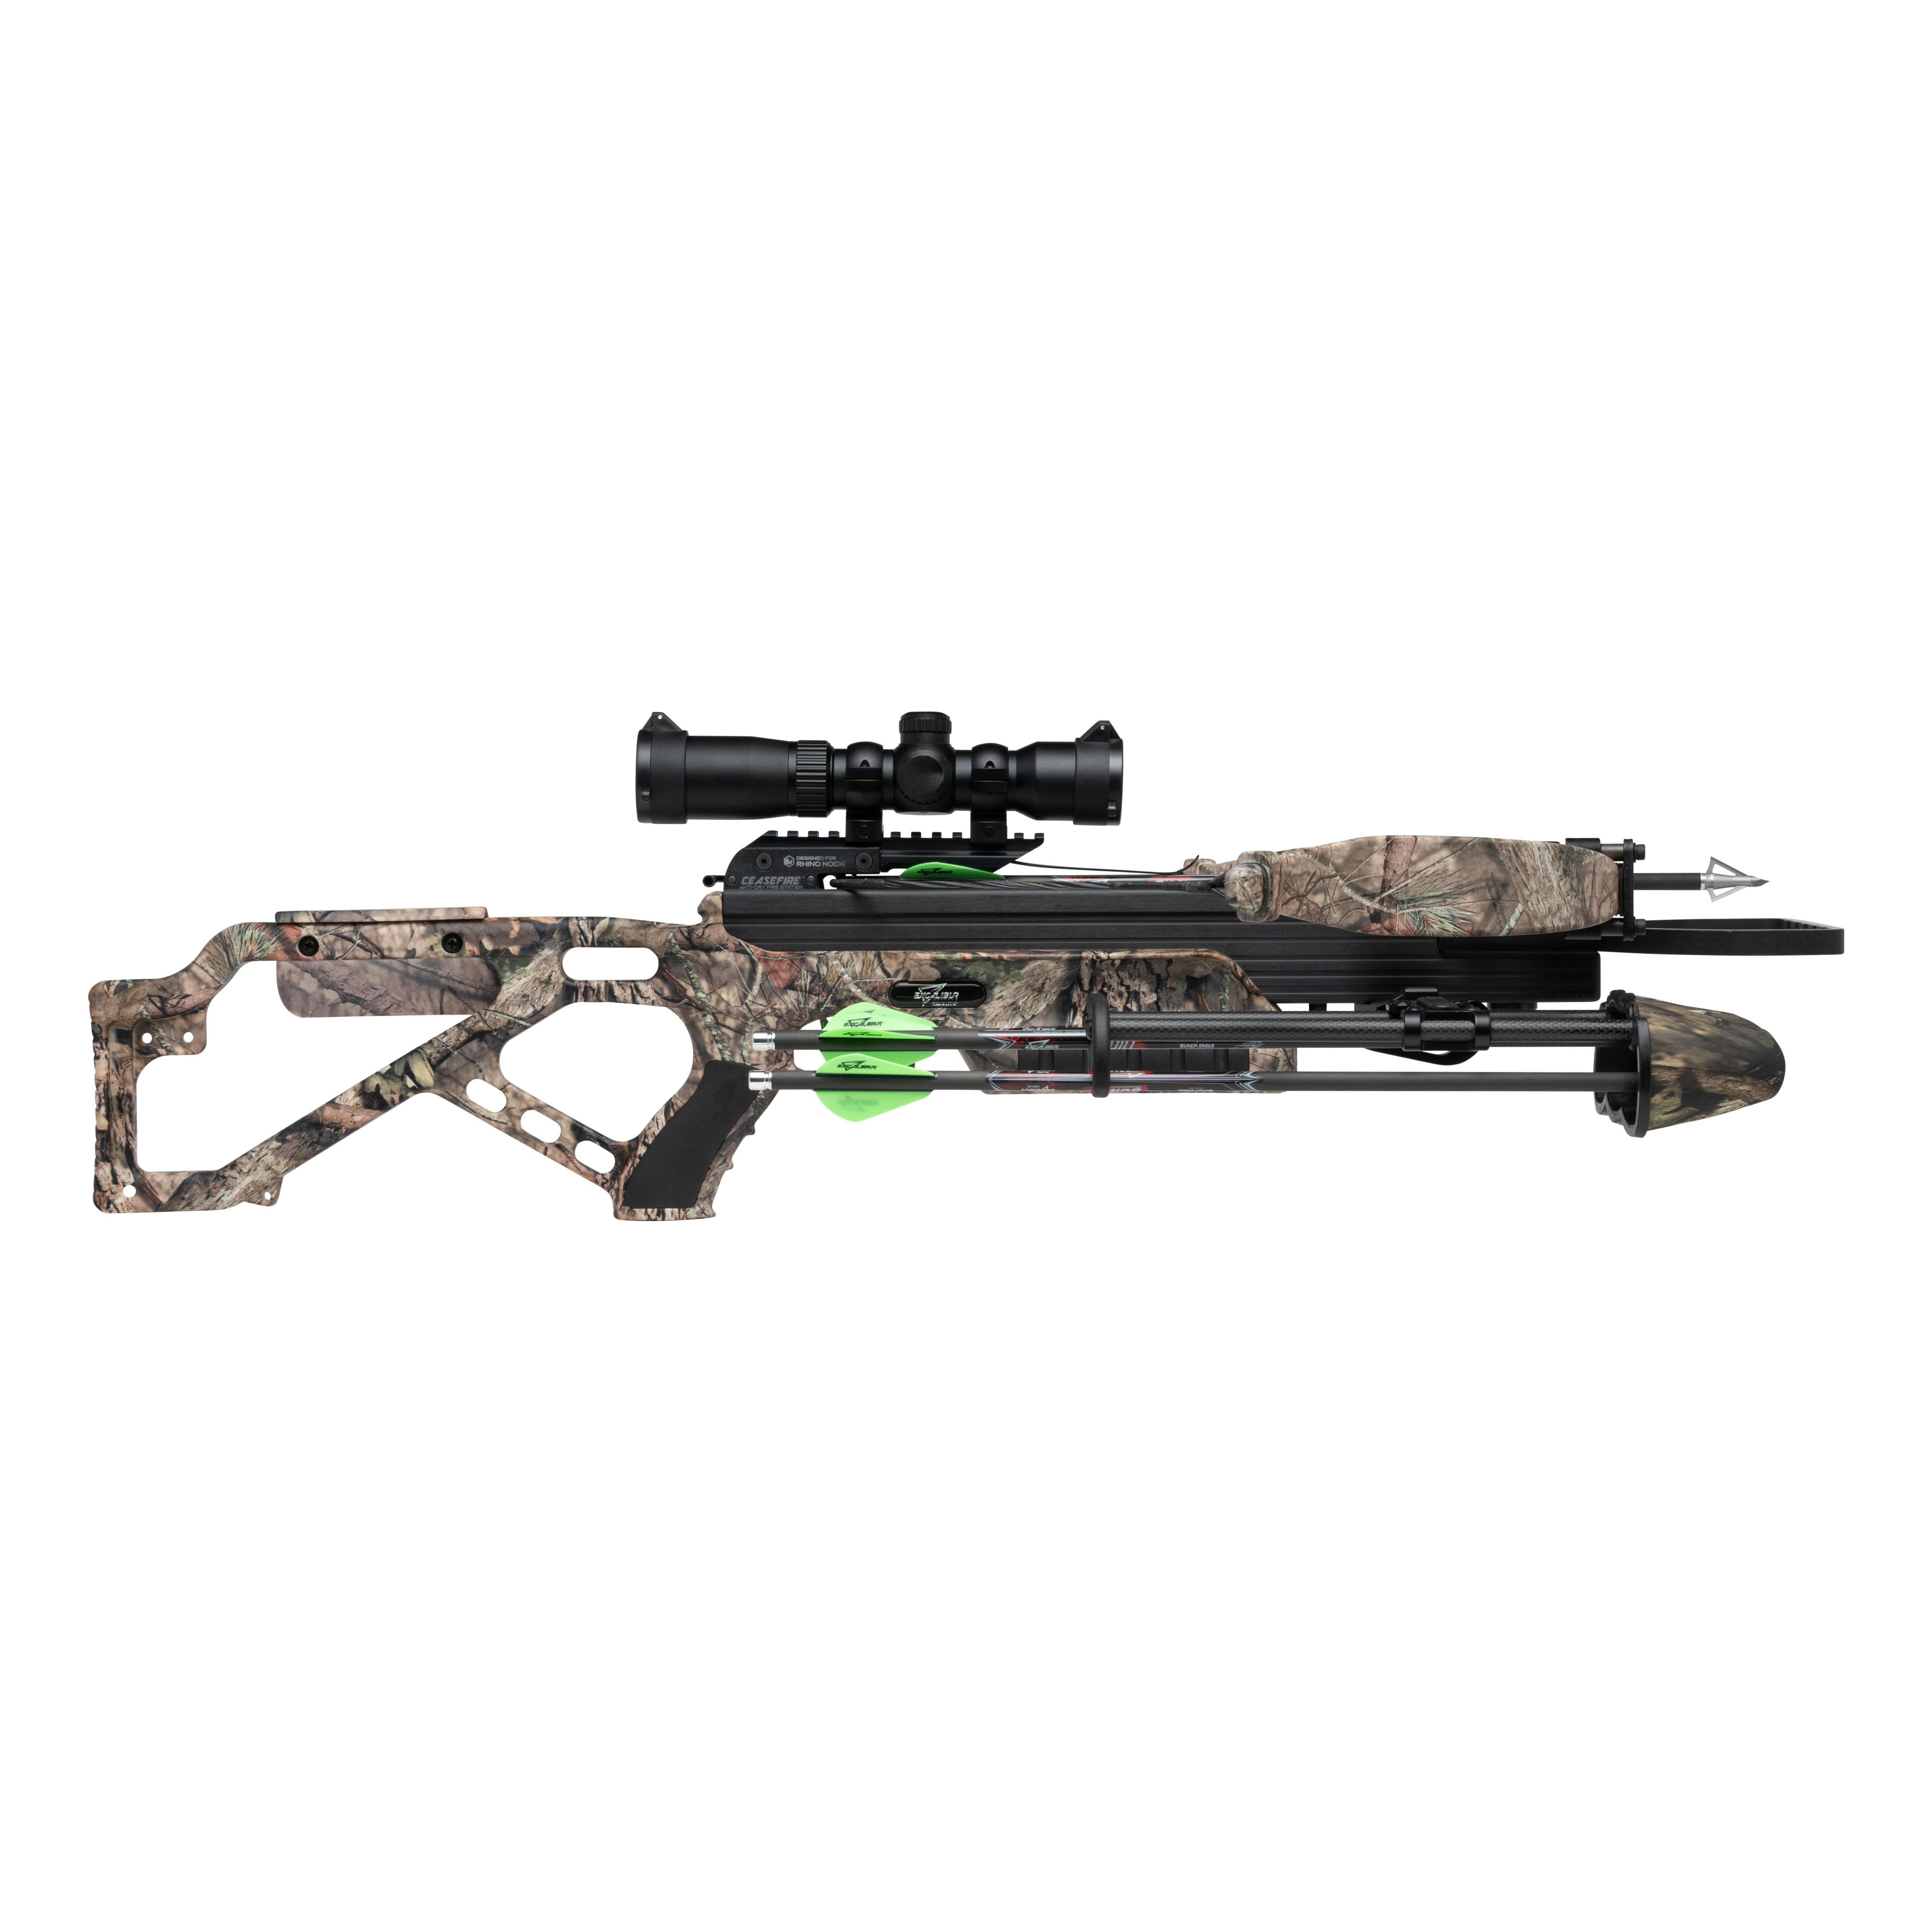 Excalibur® Micro 380 Crossbow Package